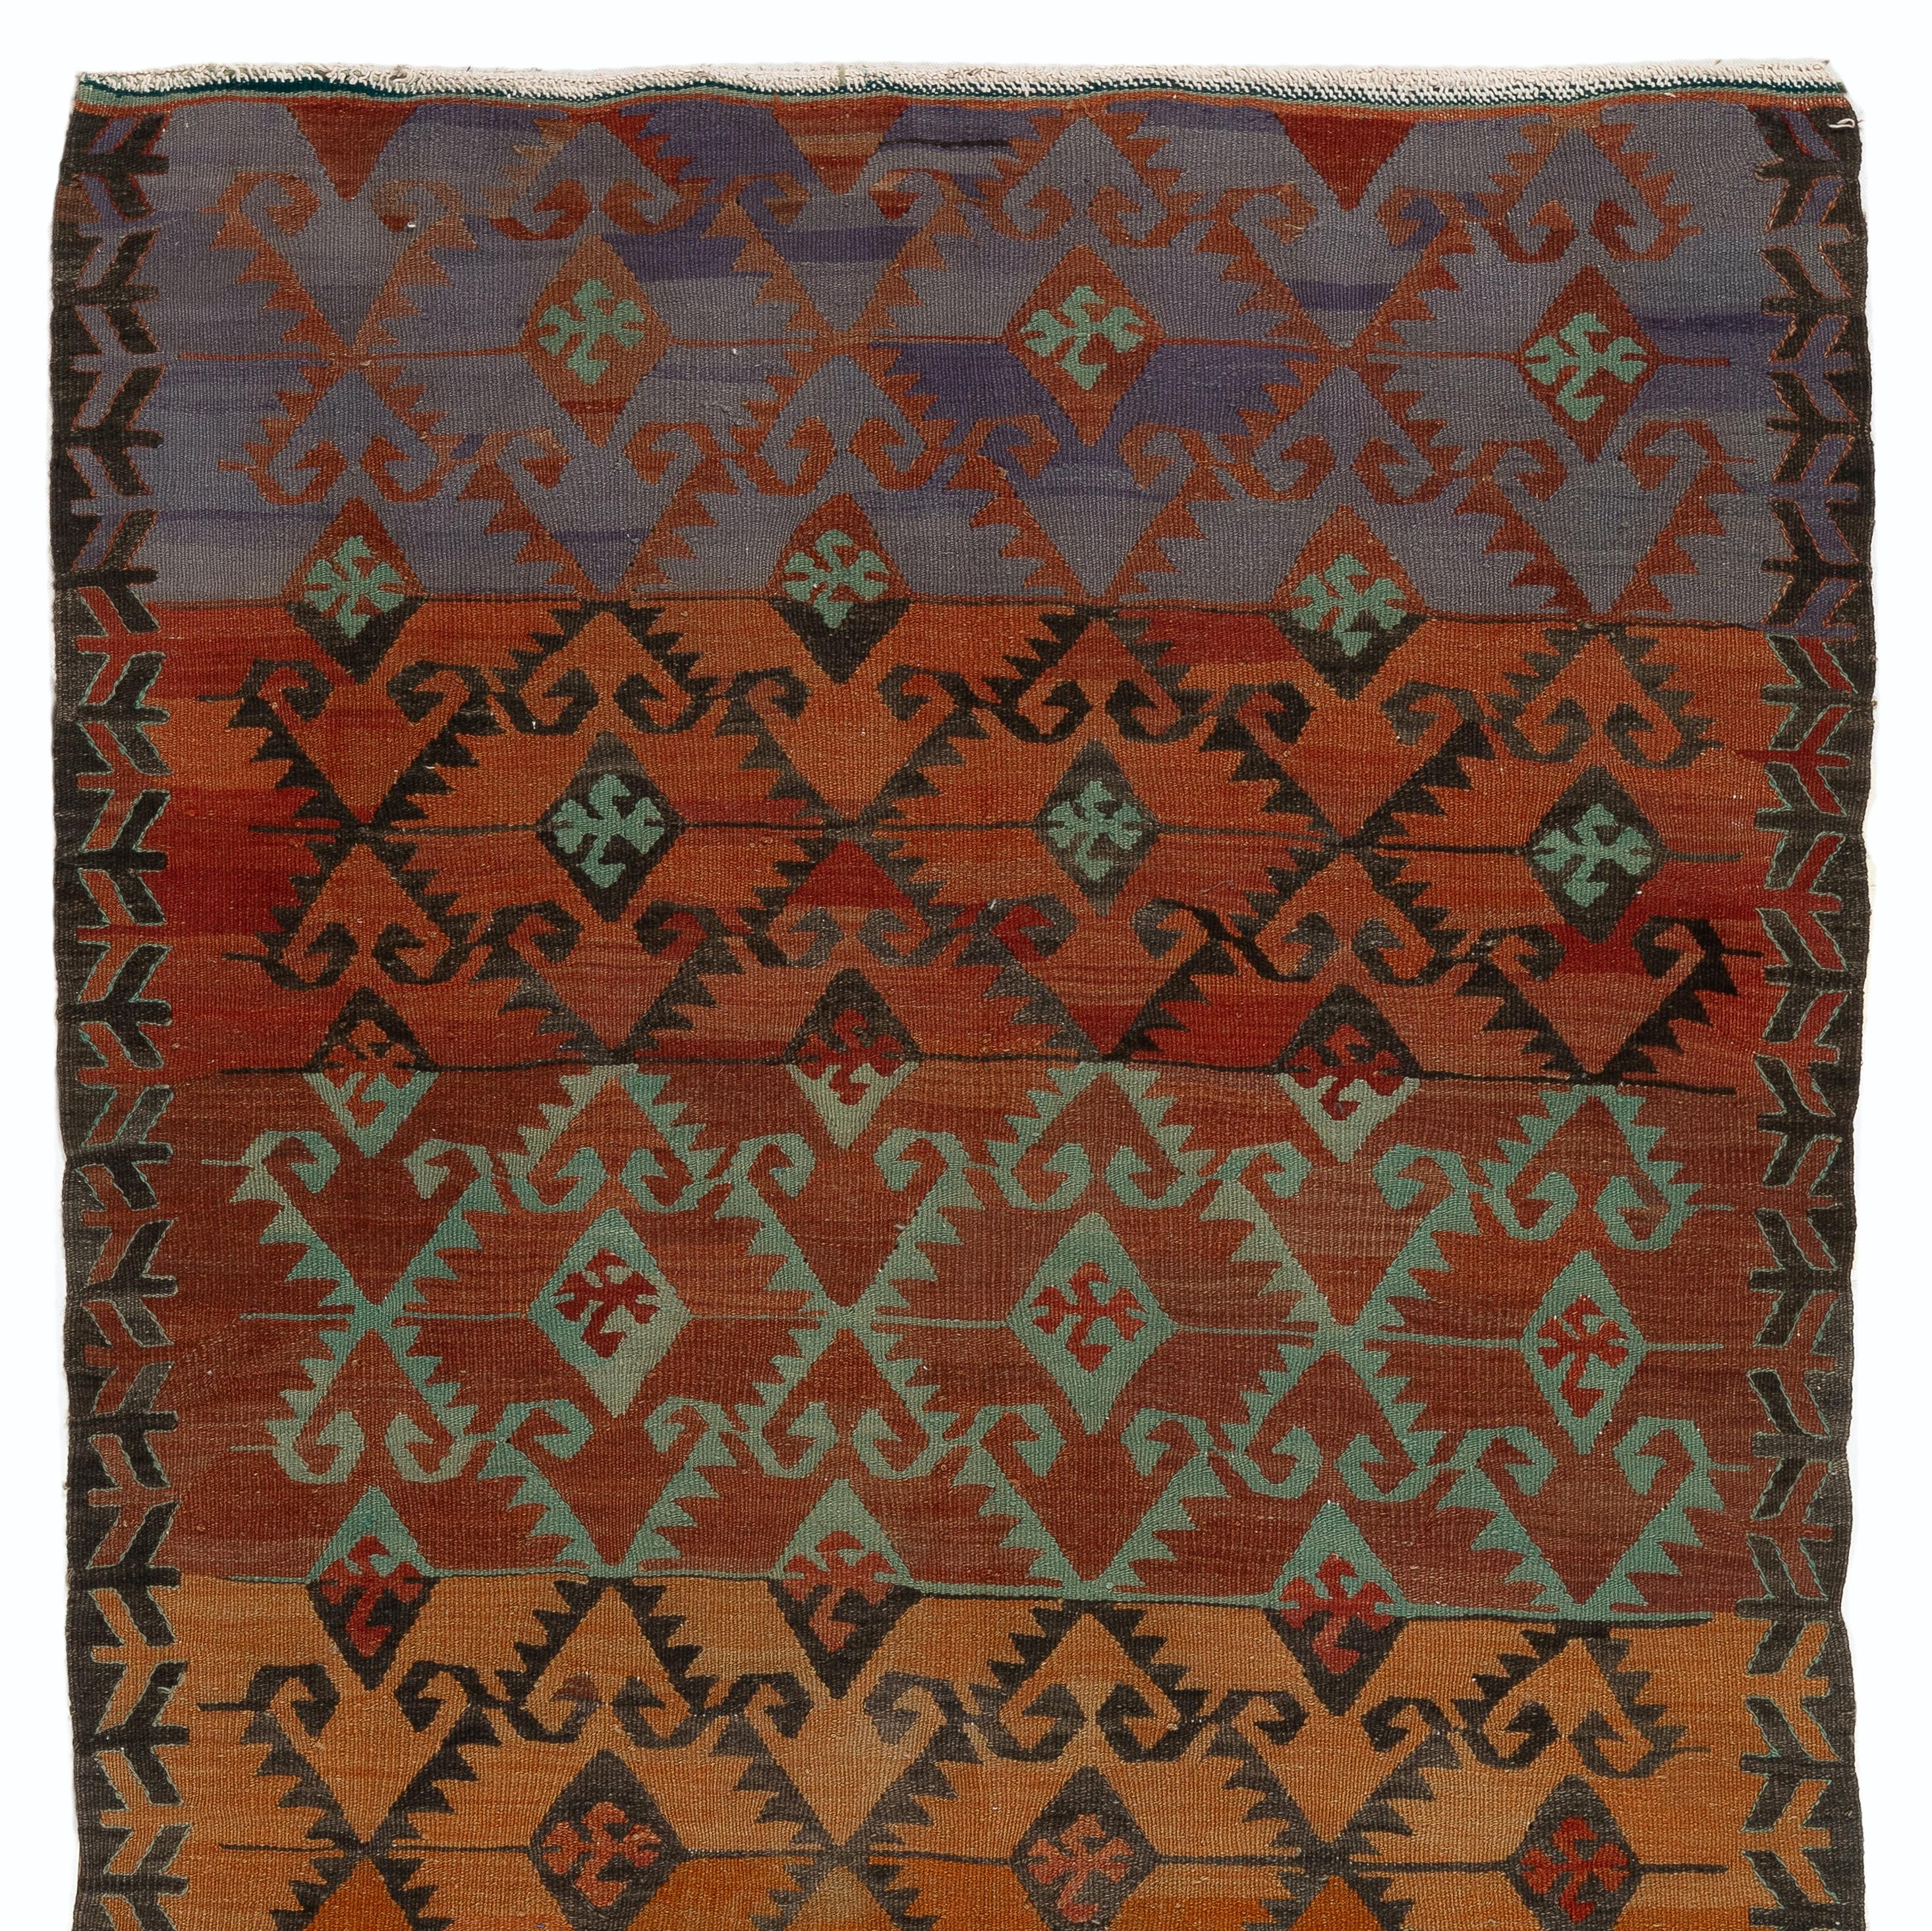 Hand-Woven 3.6x7.3 Ft Multicolor Vintage Turkish Kilim with Geometric Design Rug, %100 Wool For Sale